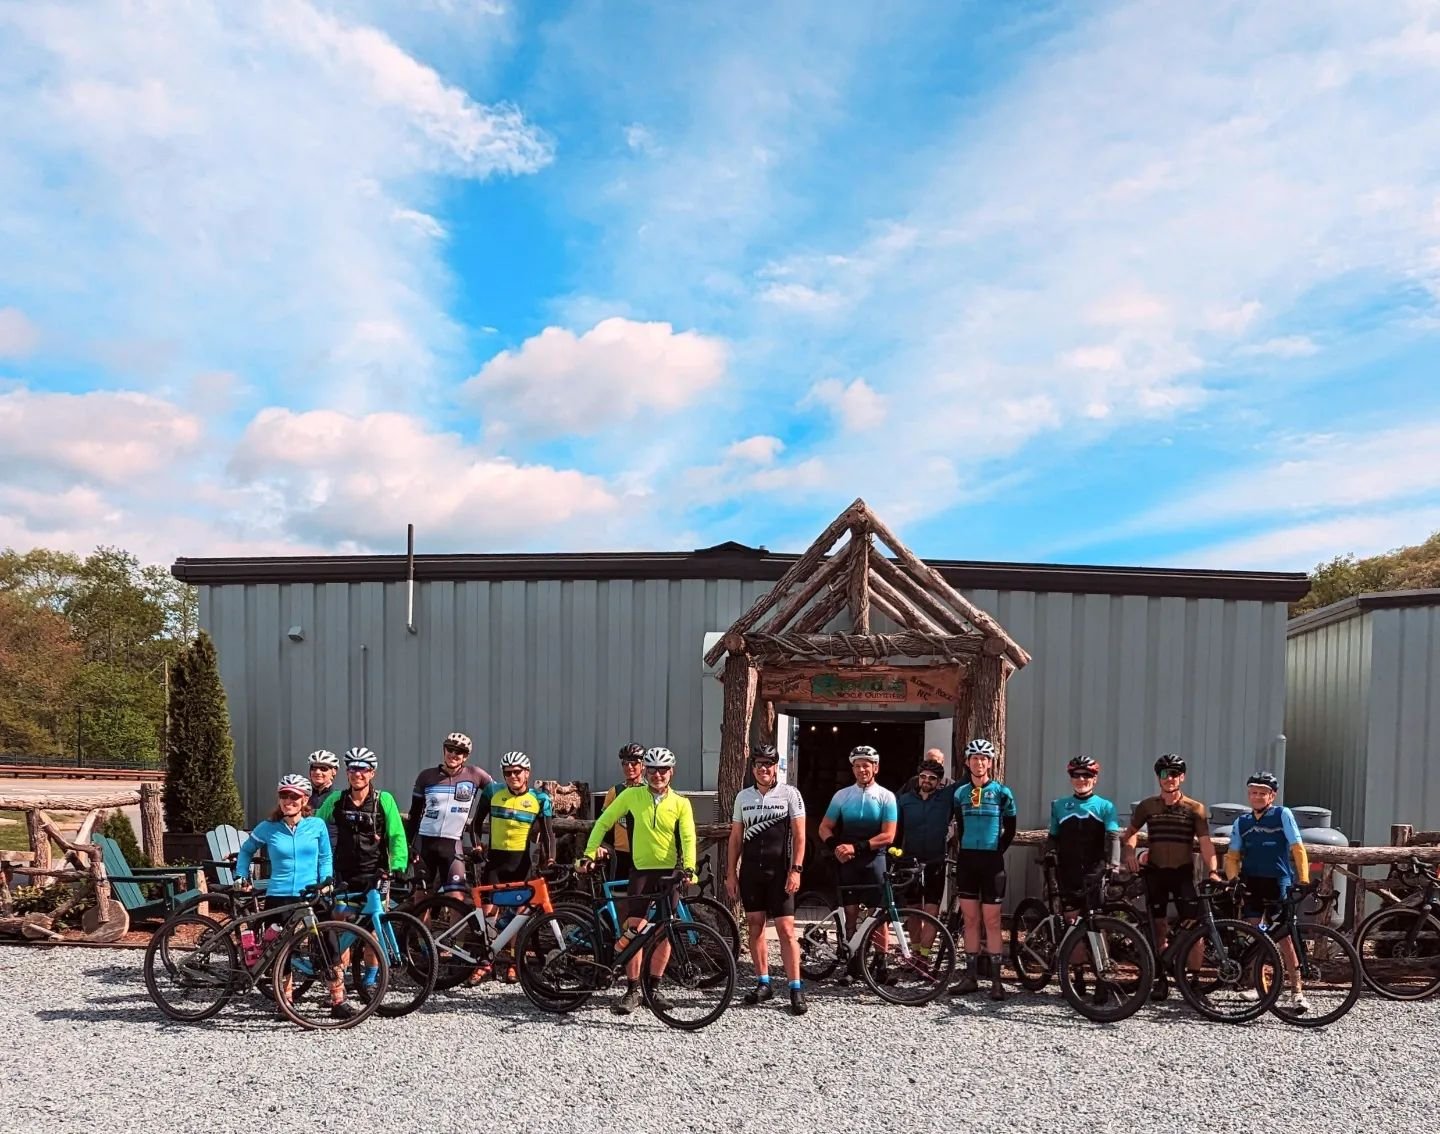 What a wonderful 3T Mixer Ride! Thank you to each person who came out. Such a wonderful group ride!

Join us tomorrow for 3T Demo Day 10am-5pm at Valle Crucis Community Park. Enjoy an extended 3T Bike test ride on Watauga River Road. Lunch and bevera